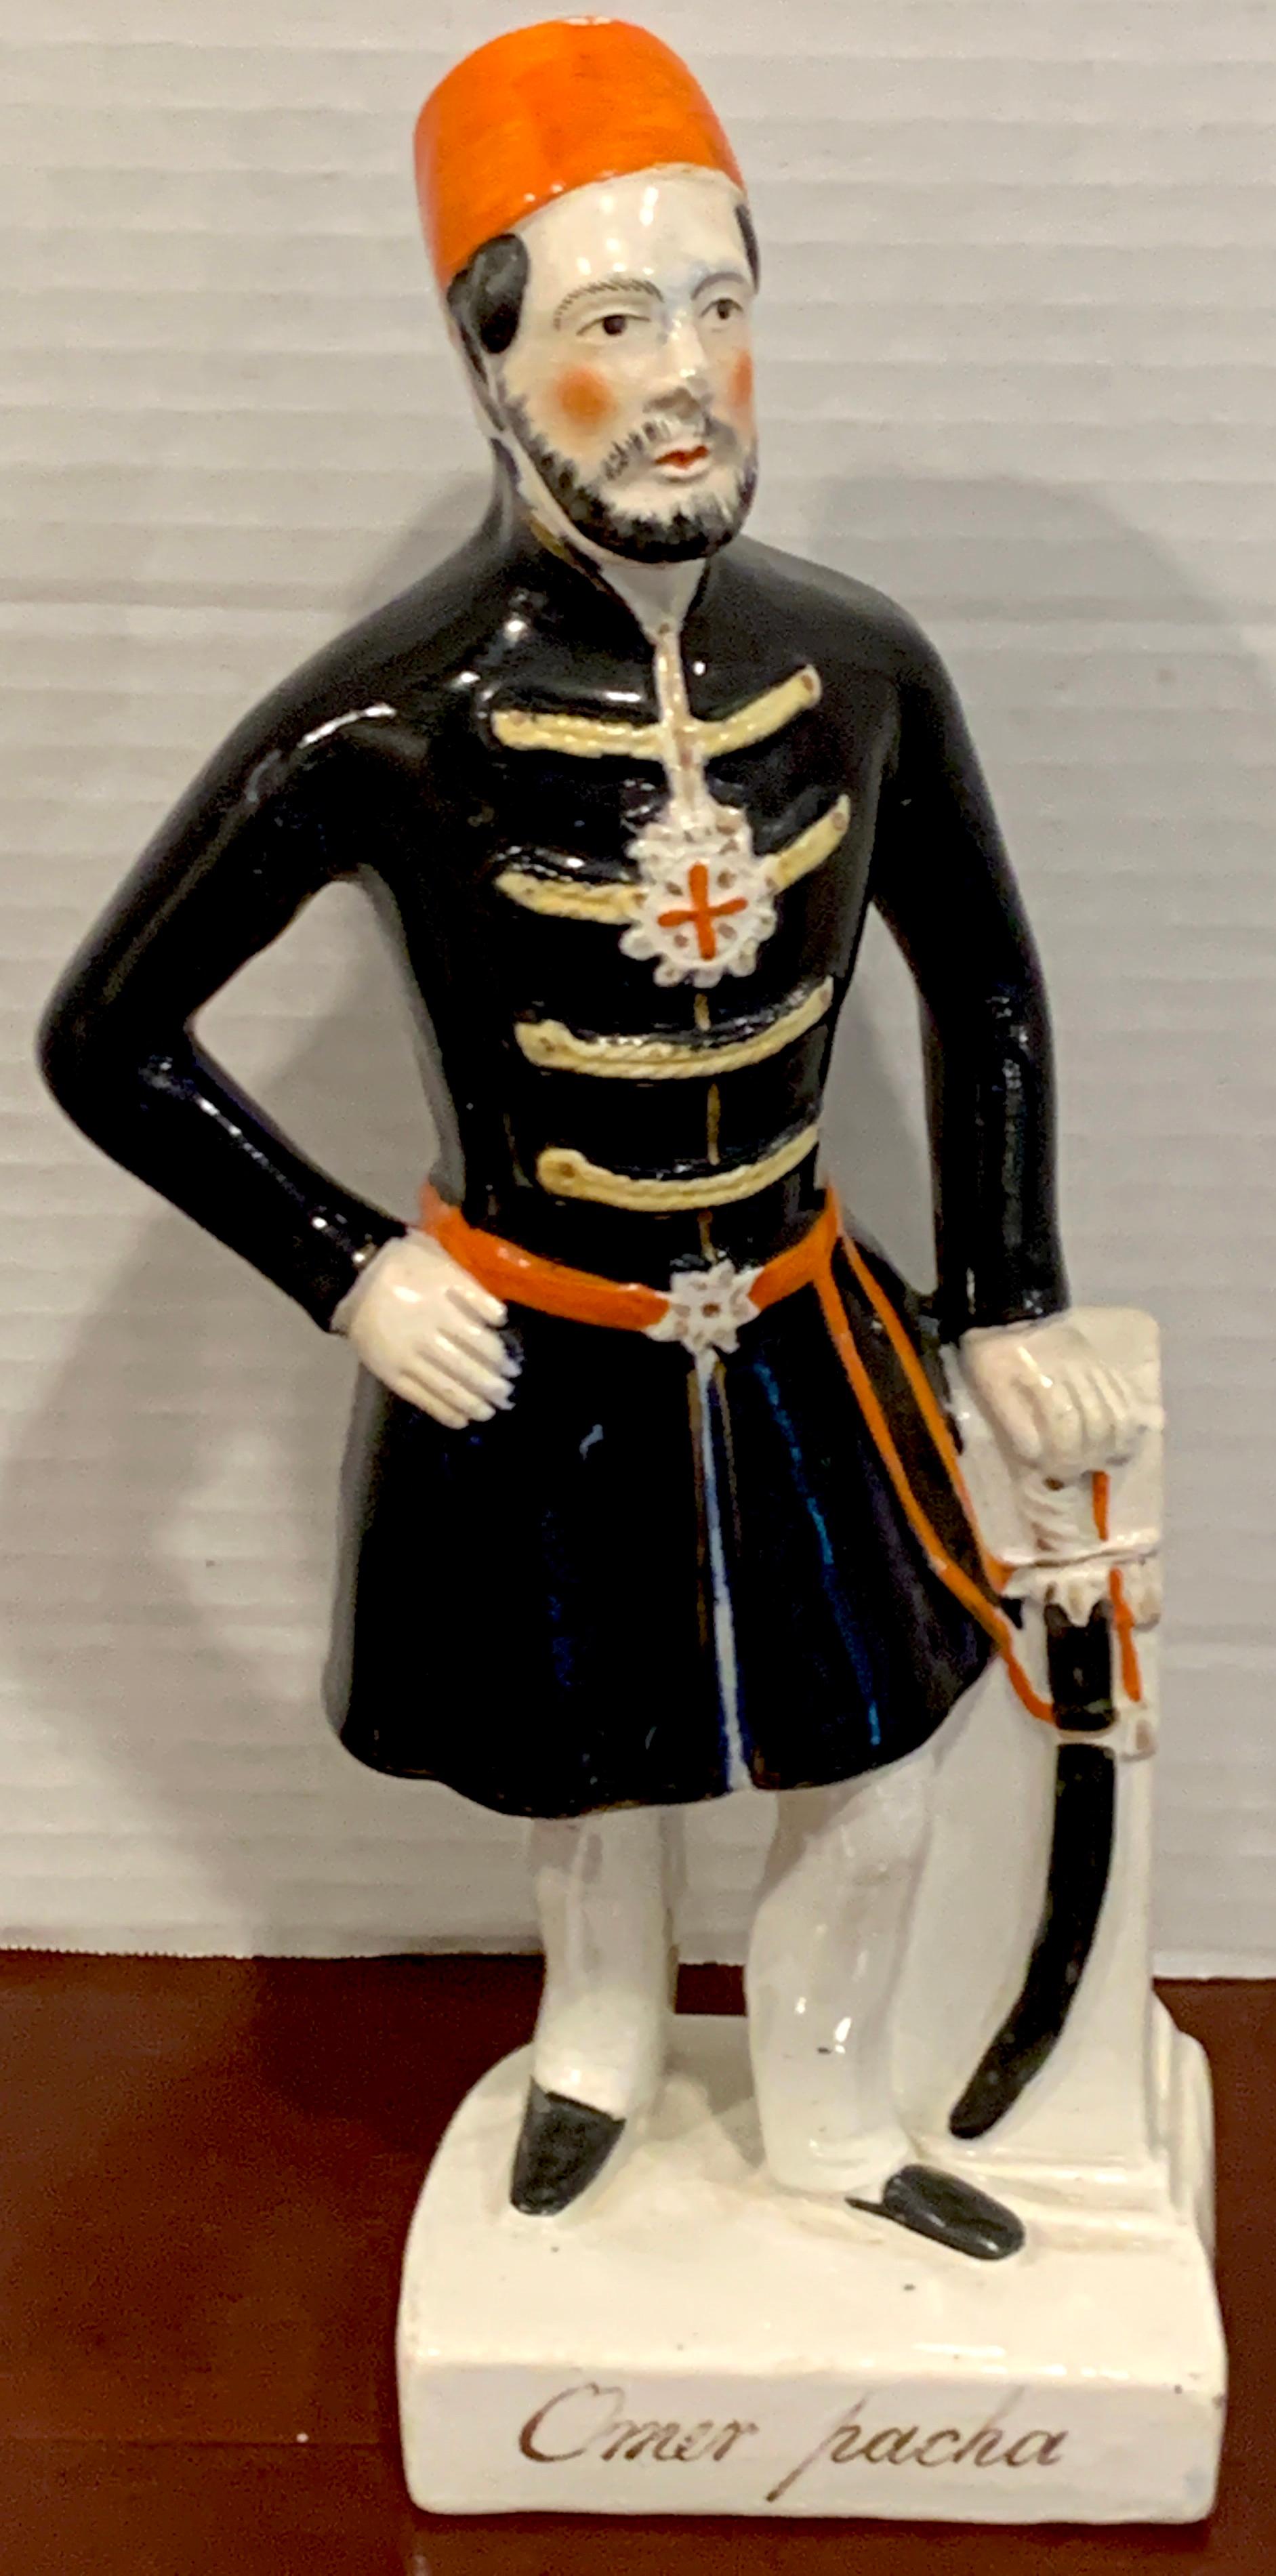 19th century Staffordshire military portrait figure of Omar Pacha, A rare well decorated version, depicting the Omar Pasha, also known as Omer Pasha Latas (Turkish: Ömer Pasa, Serbian: Omer-paša Latas; 1806–1871) was an ottoman field marshal and